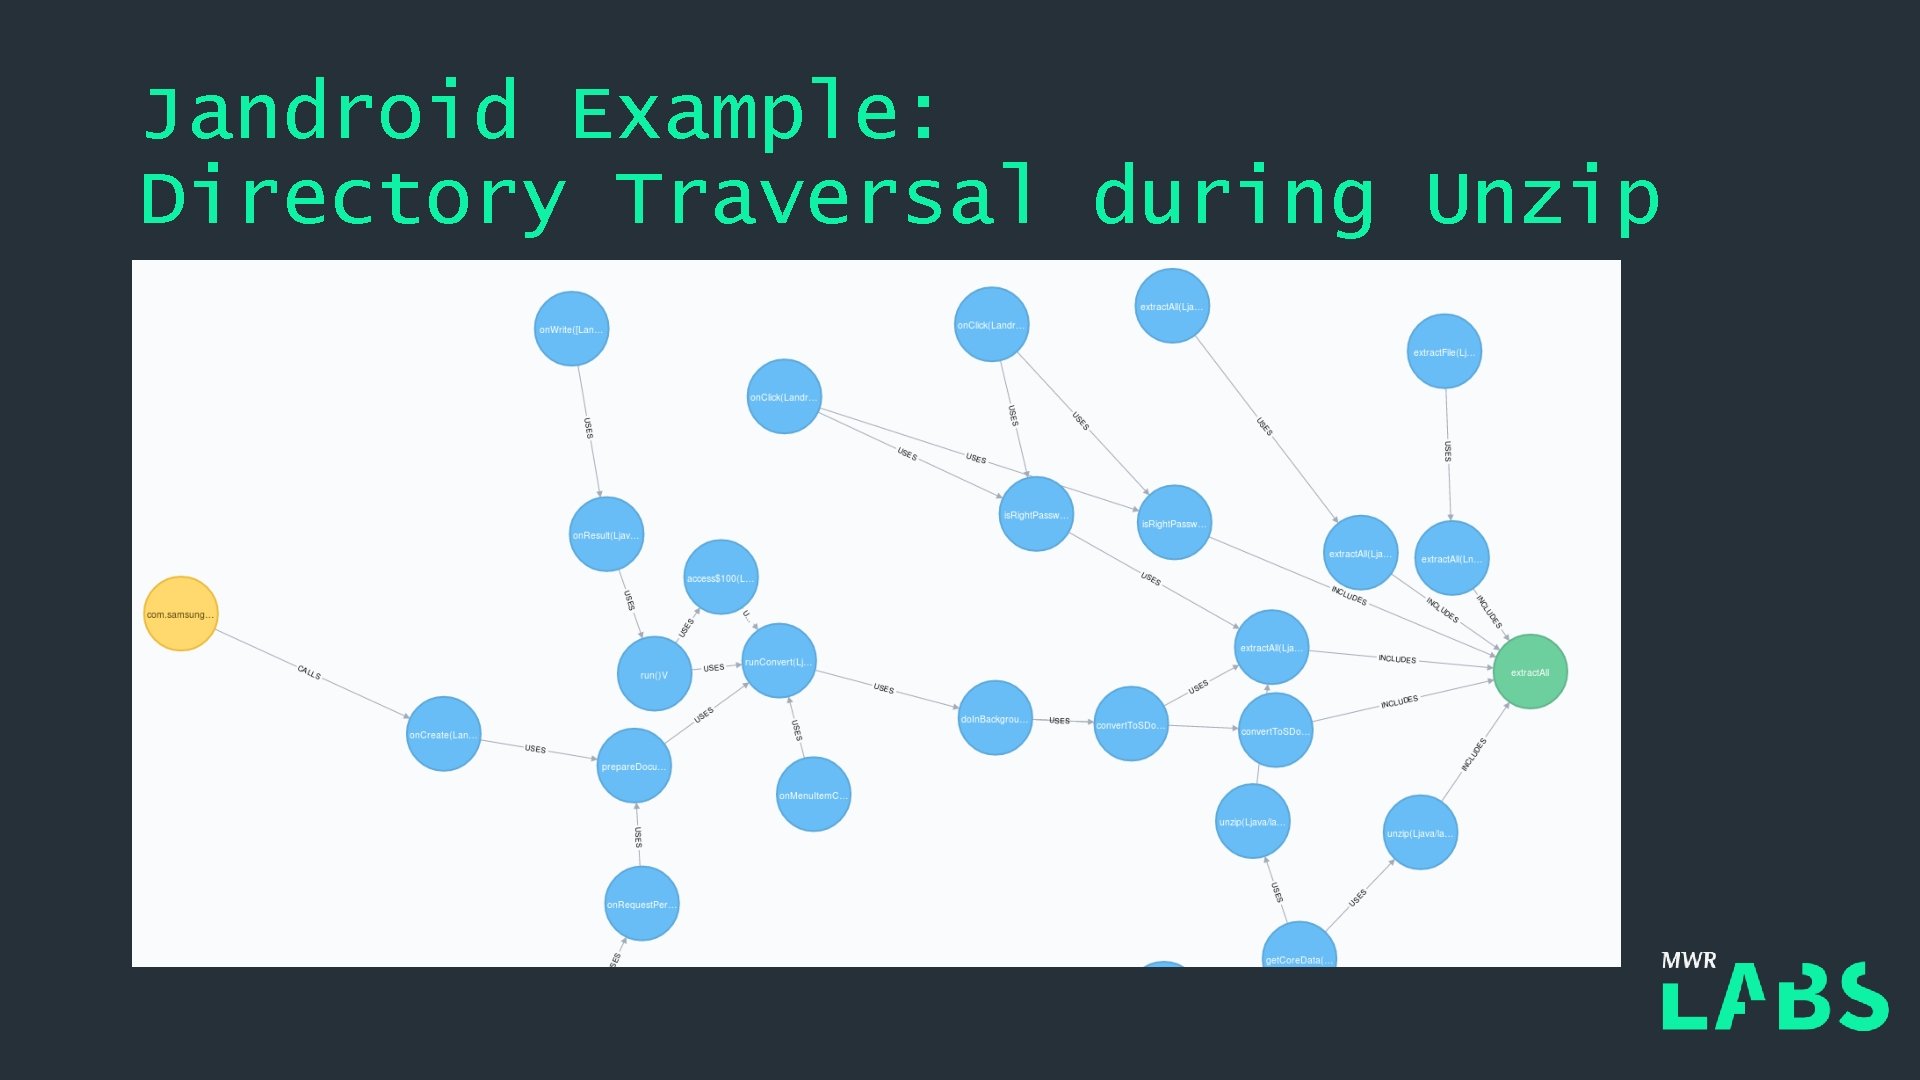 Jandroid Example: Directory Traversal during Unzip 